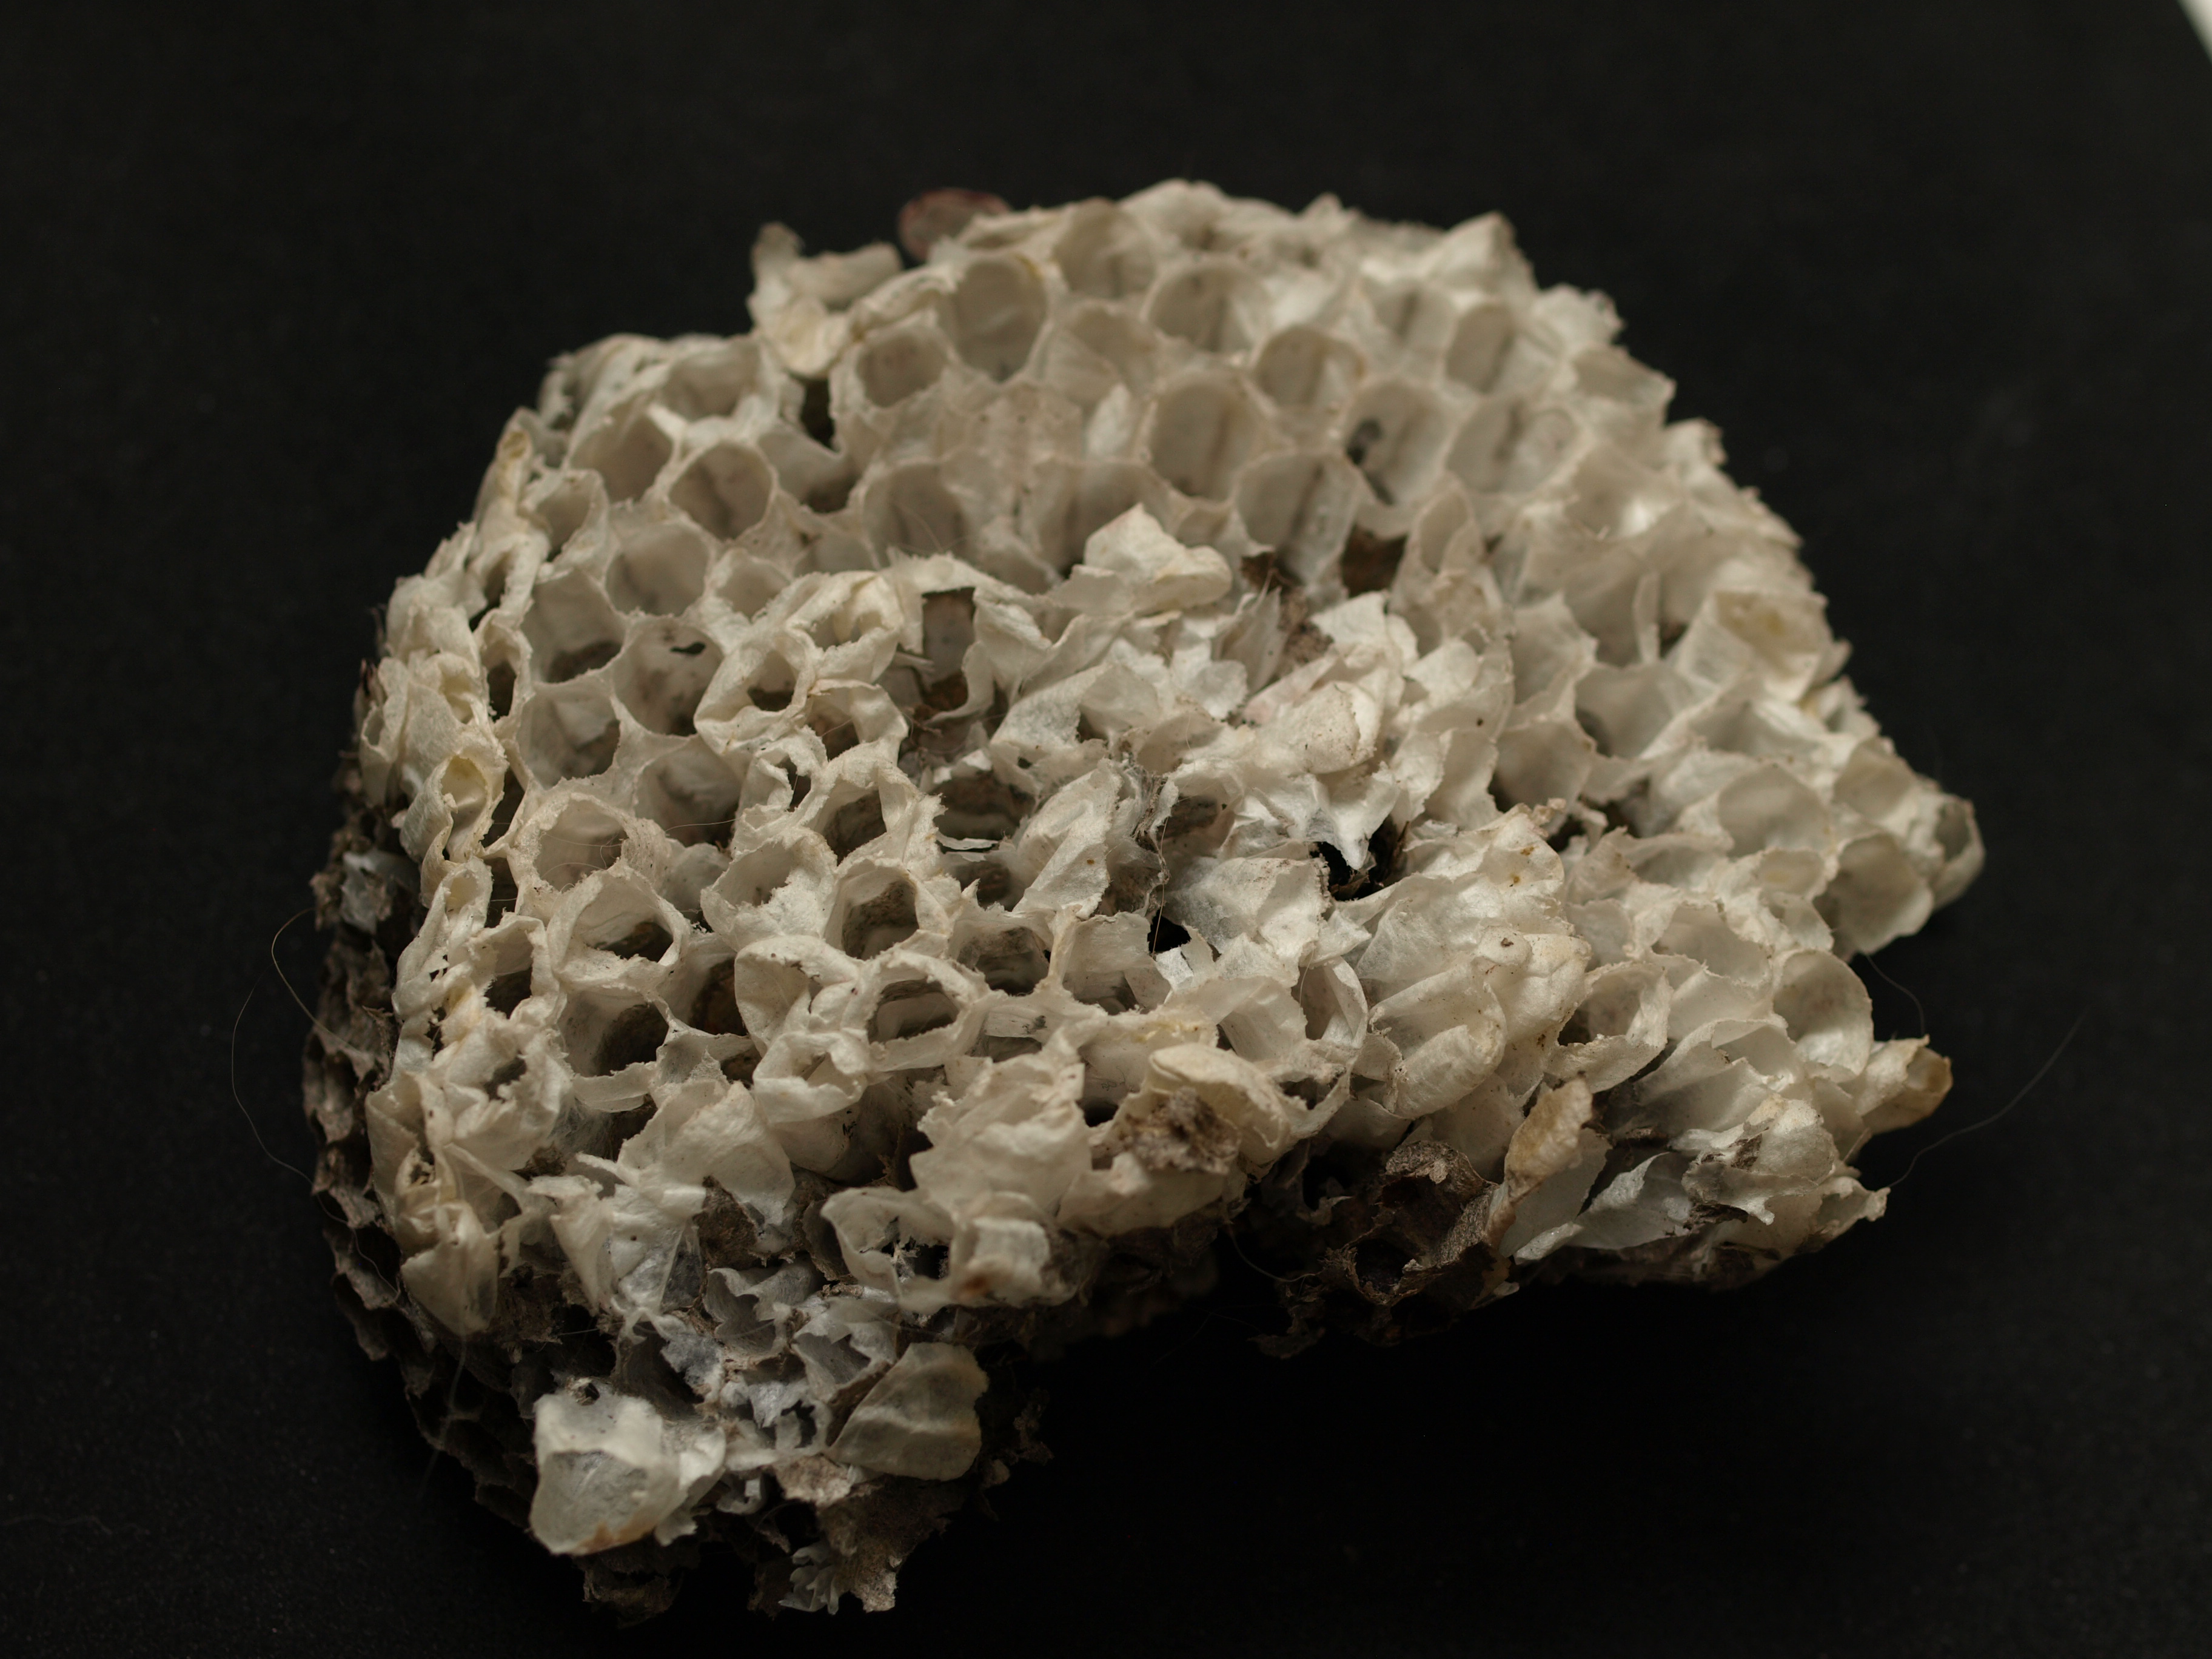 Image:  photo of a chunk of a wasp's nest sitting on a black background.